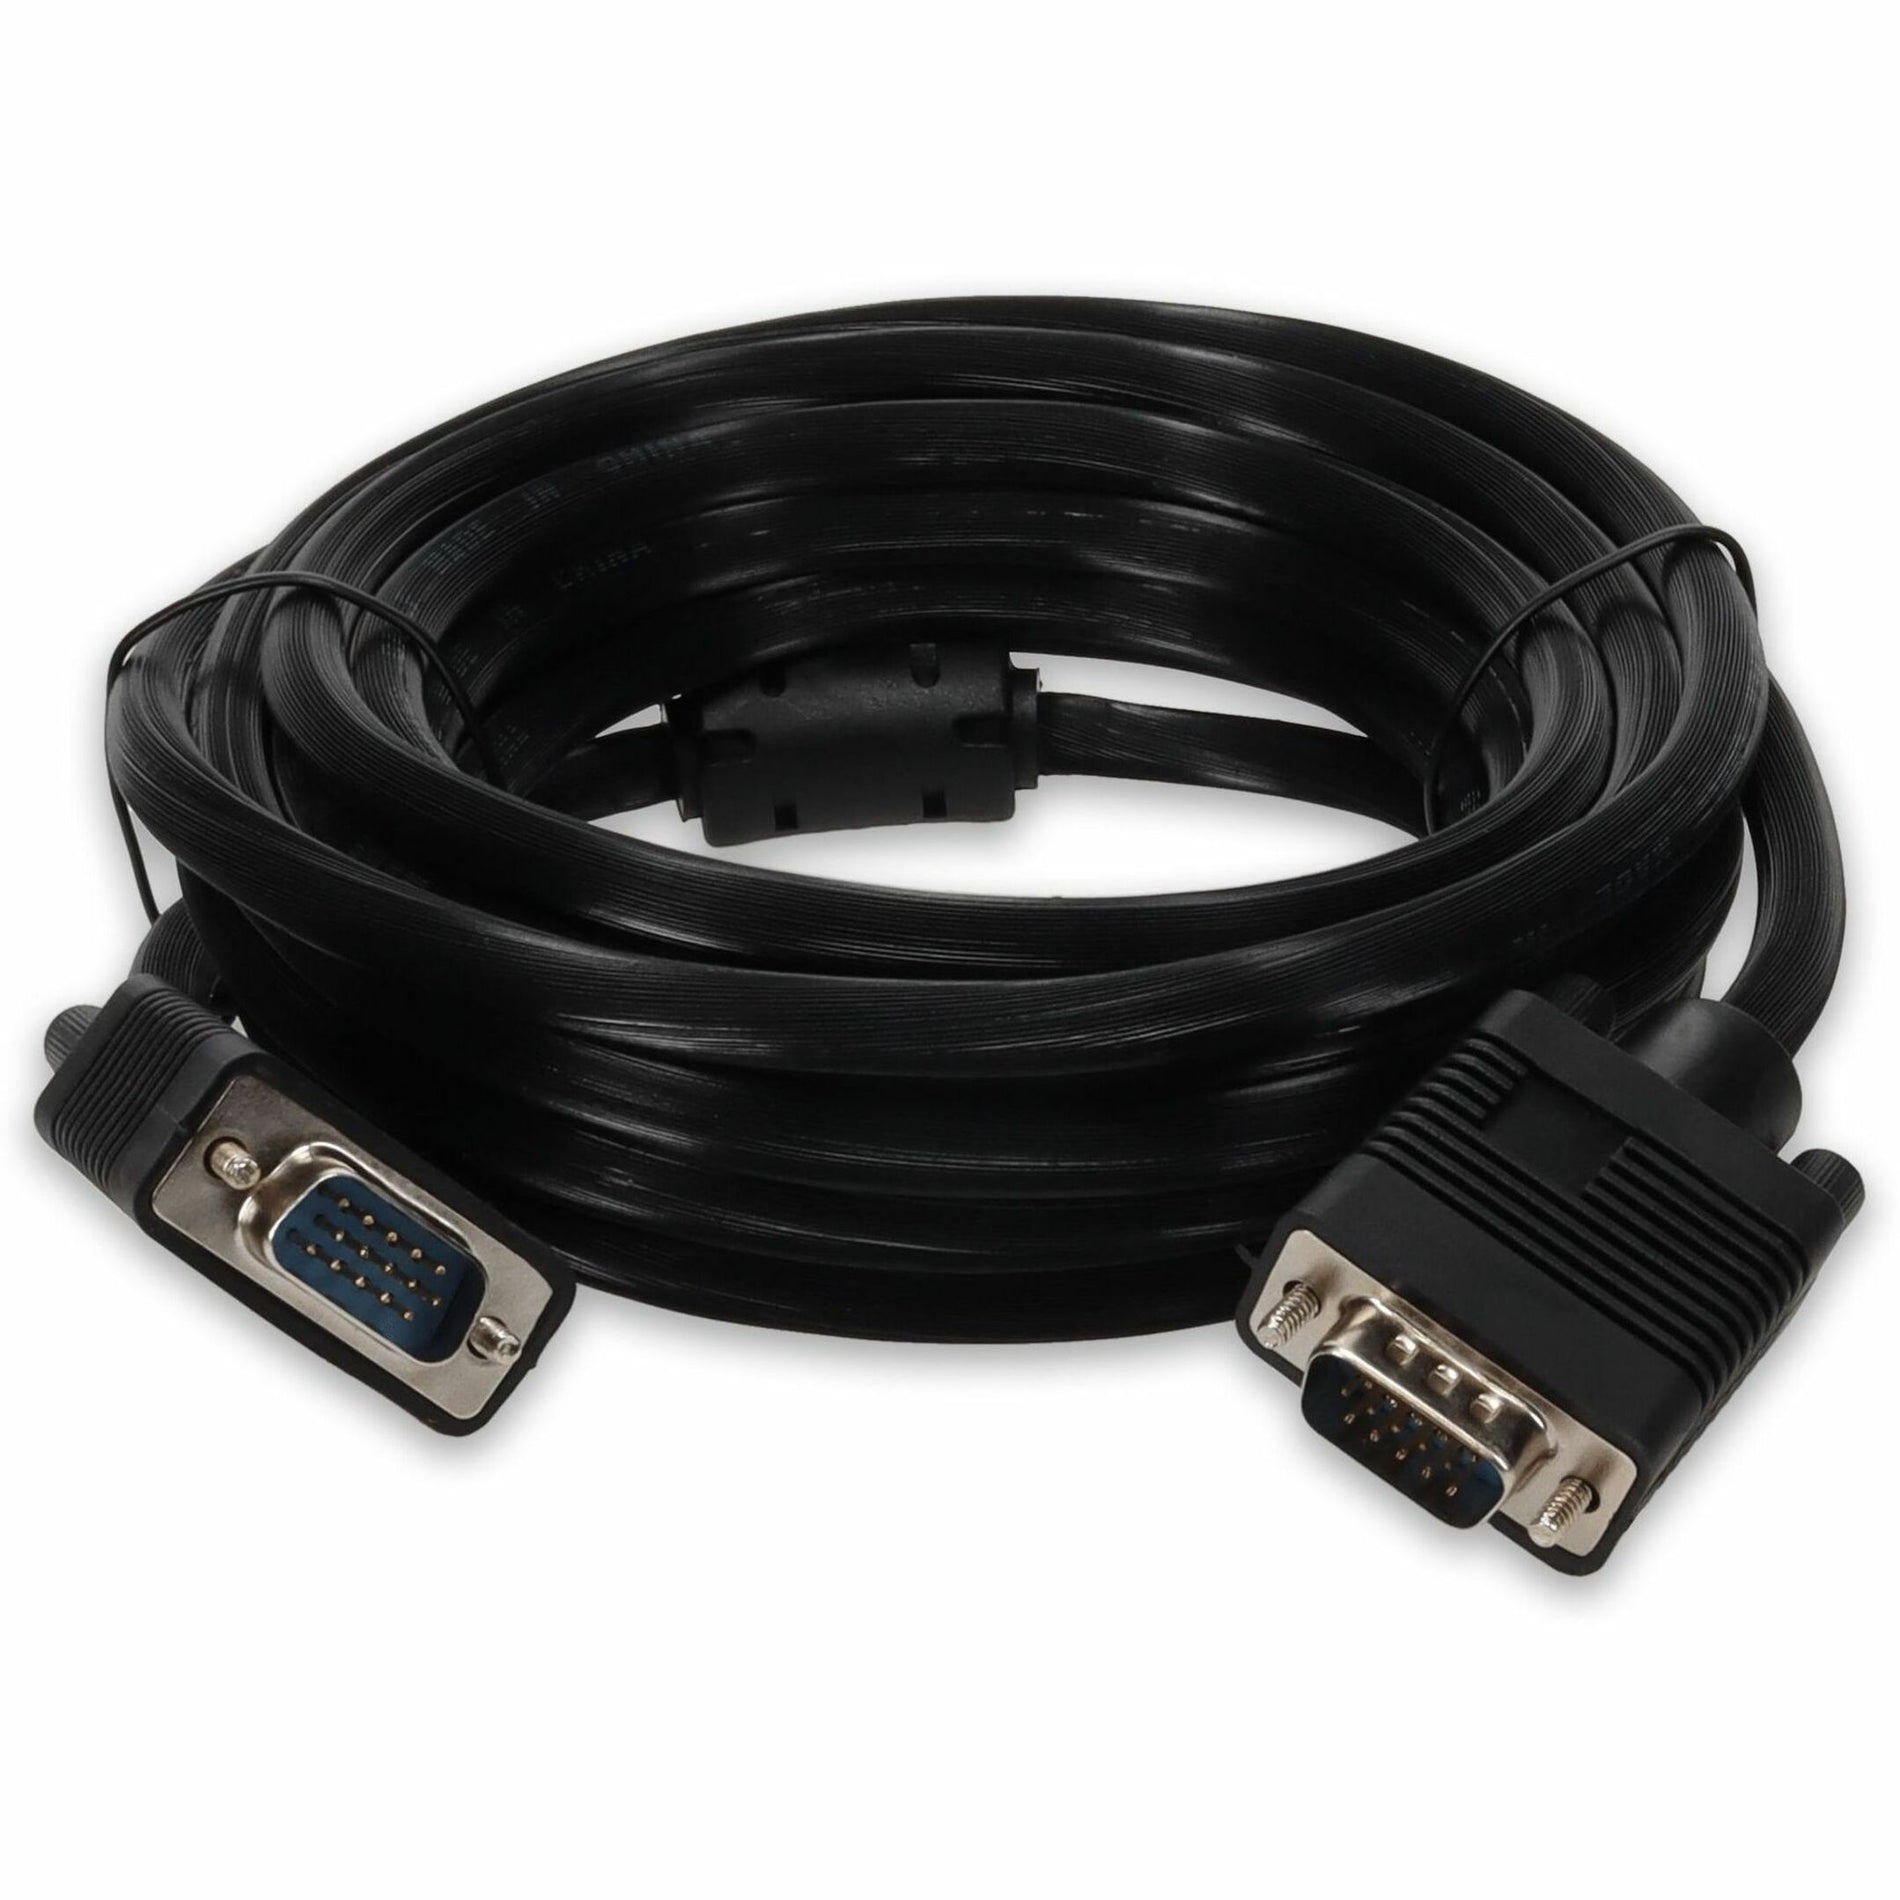 AddOn VGAMM6 6ft (1.8M) VGA High Resolution Monitor Cable - Male to Male, 3 Year Limited Warranty, United States